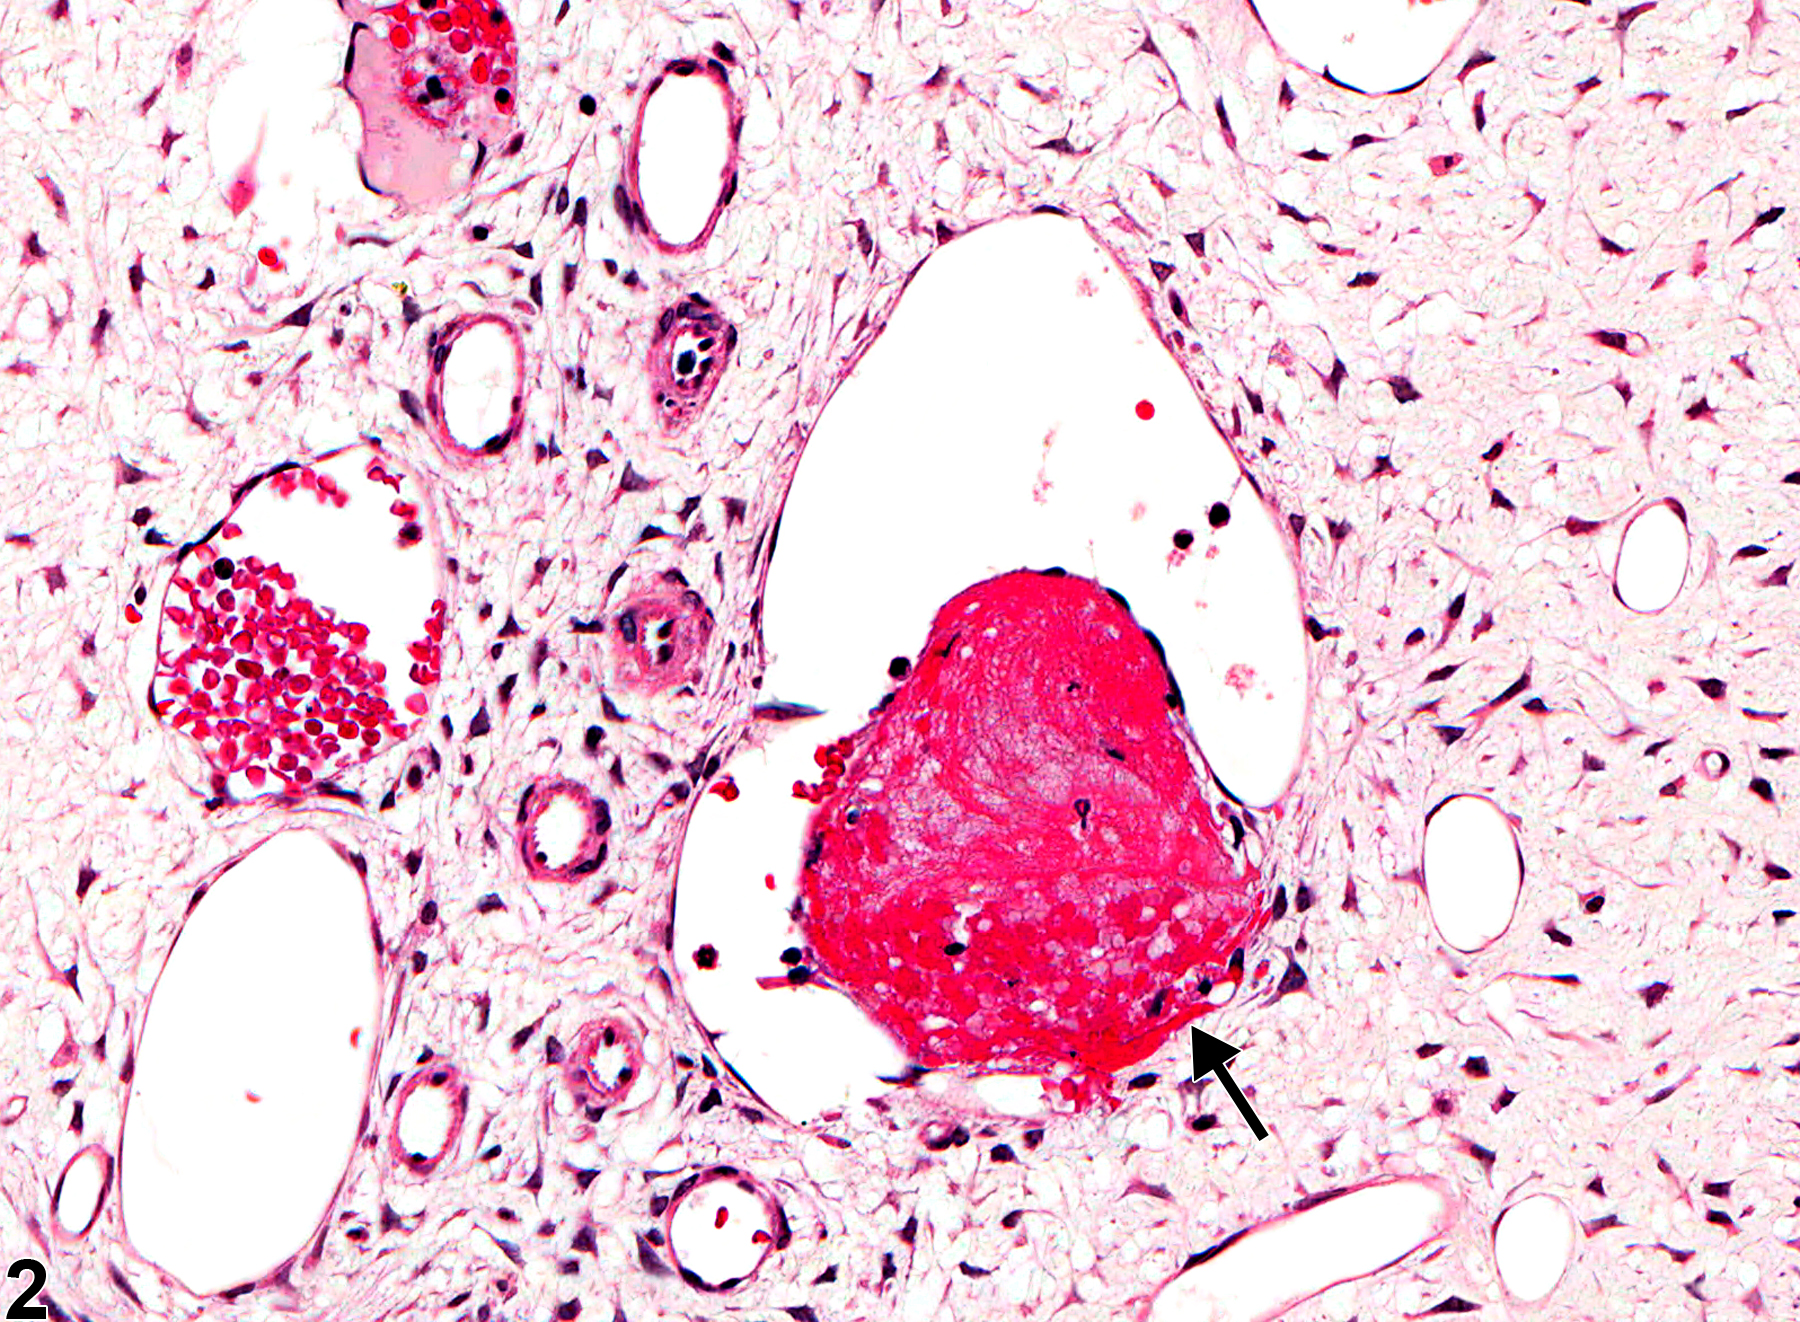 Image of thrombus in the tooth pulp from a female F344/N rat in a subchronic study